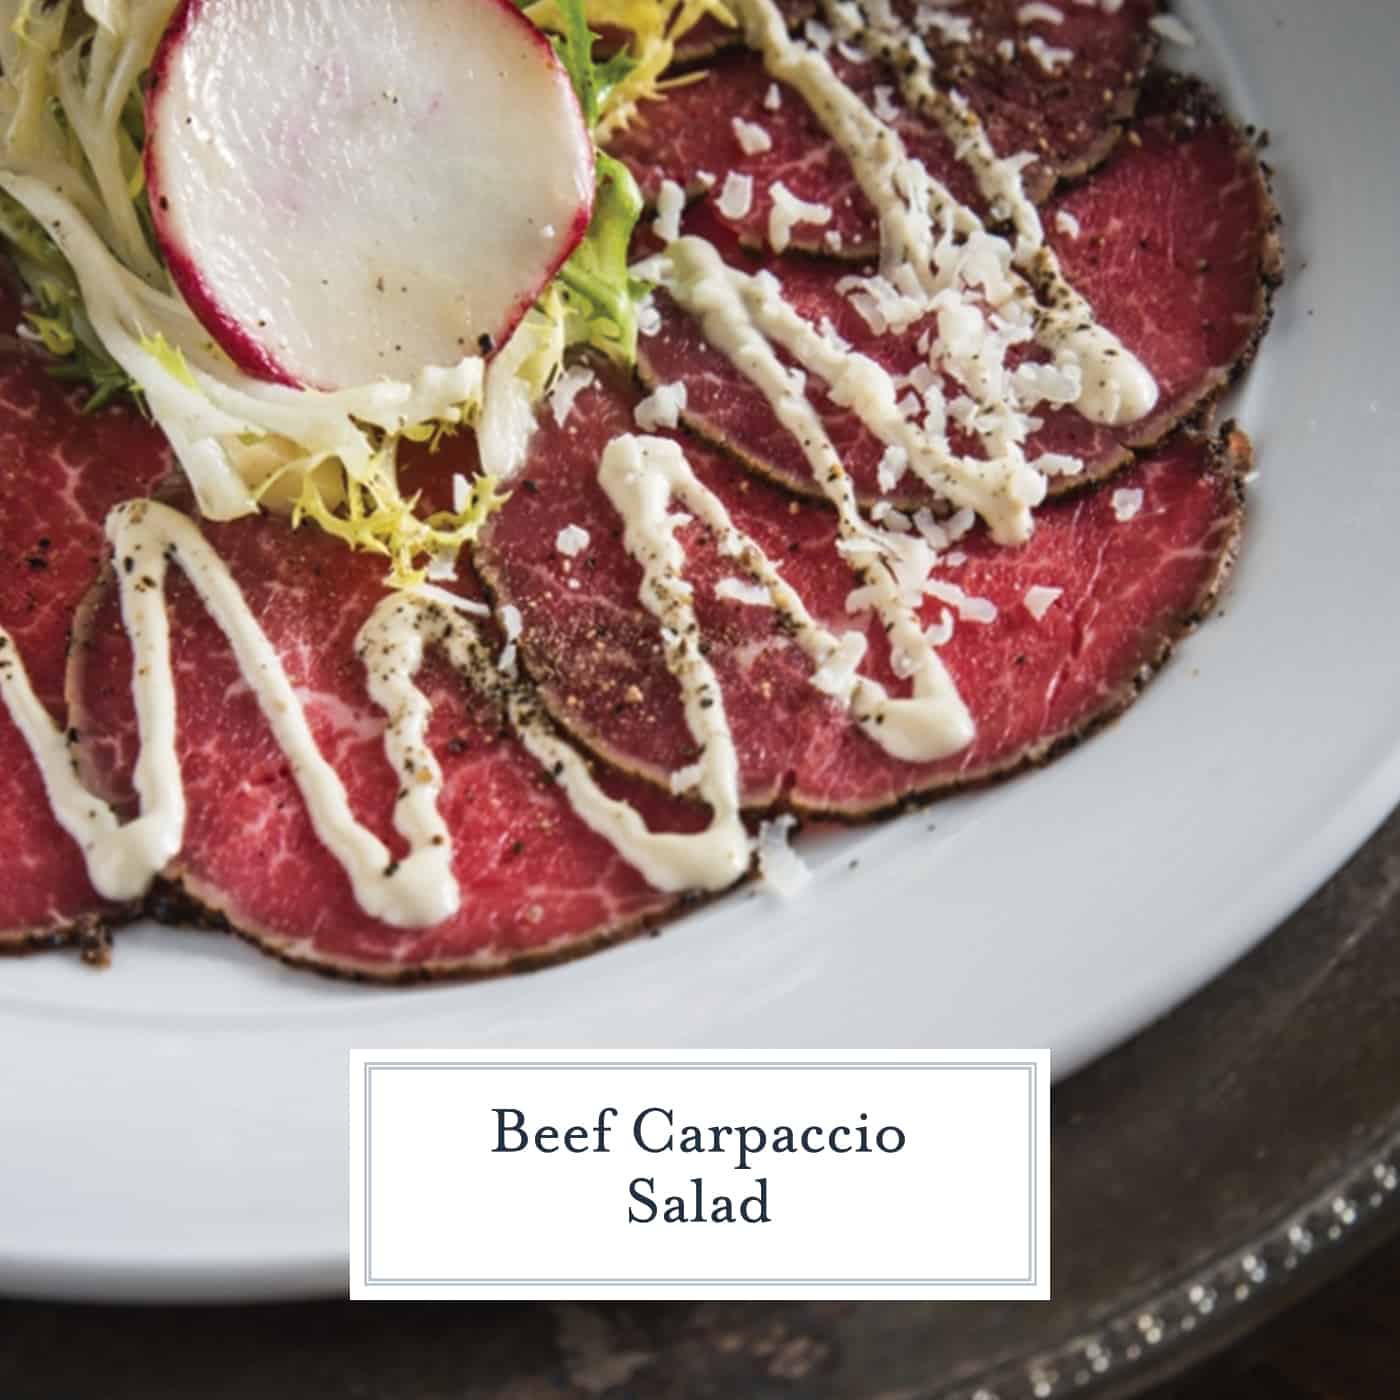 Learn how to make this Beef Tenderloin Carpaccio at home with a tangy side sauce! It's a simple and elegant dish that can be added to salads or other appetizers! #beefcarpacio www.savoryexperiments.com 